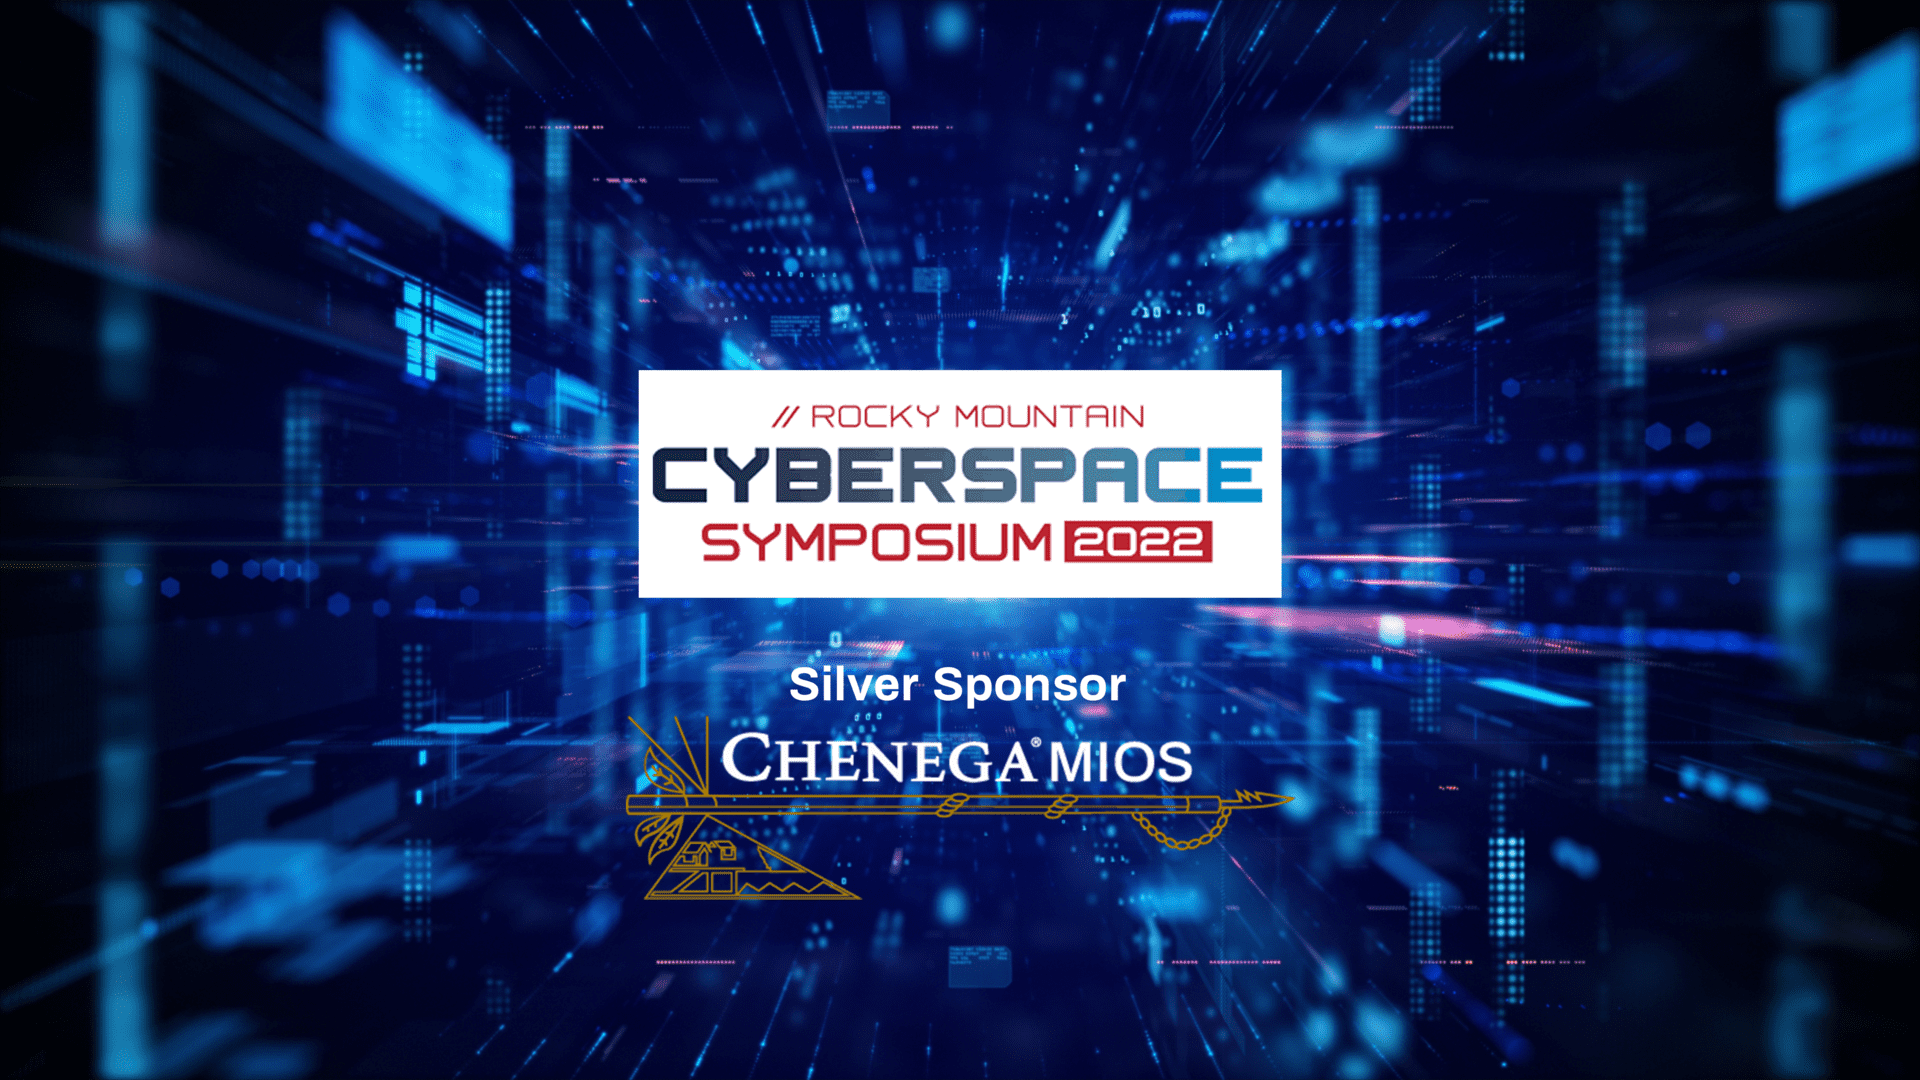 Rocky Mountain Cyberspace Symposium 2022